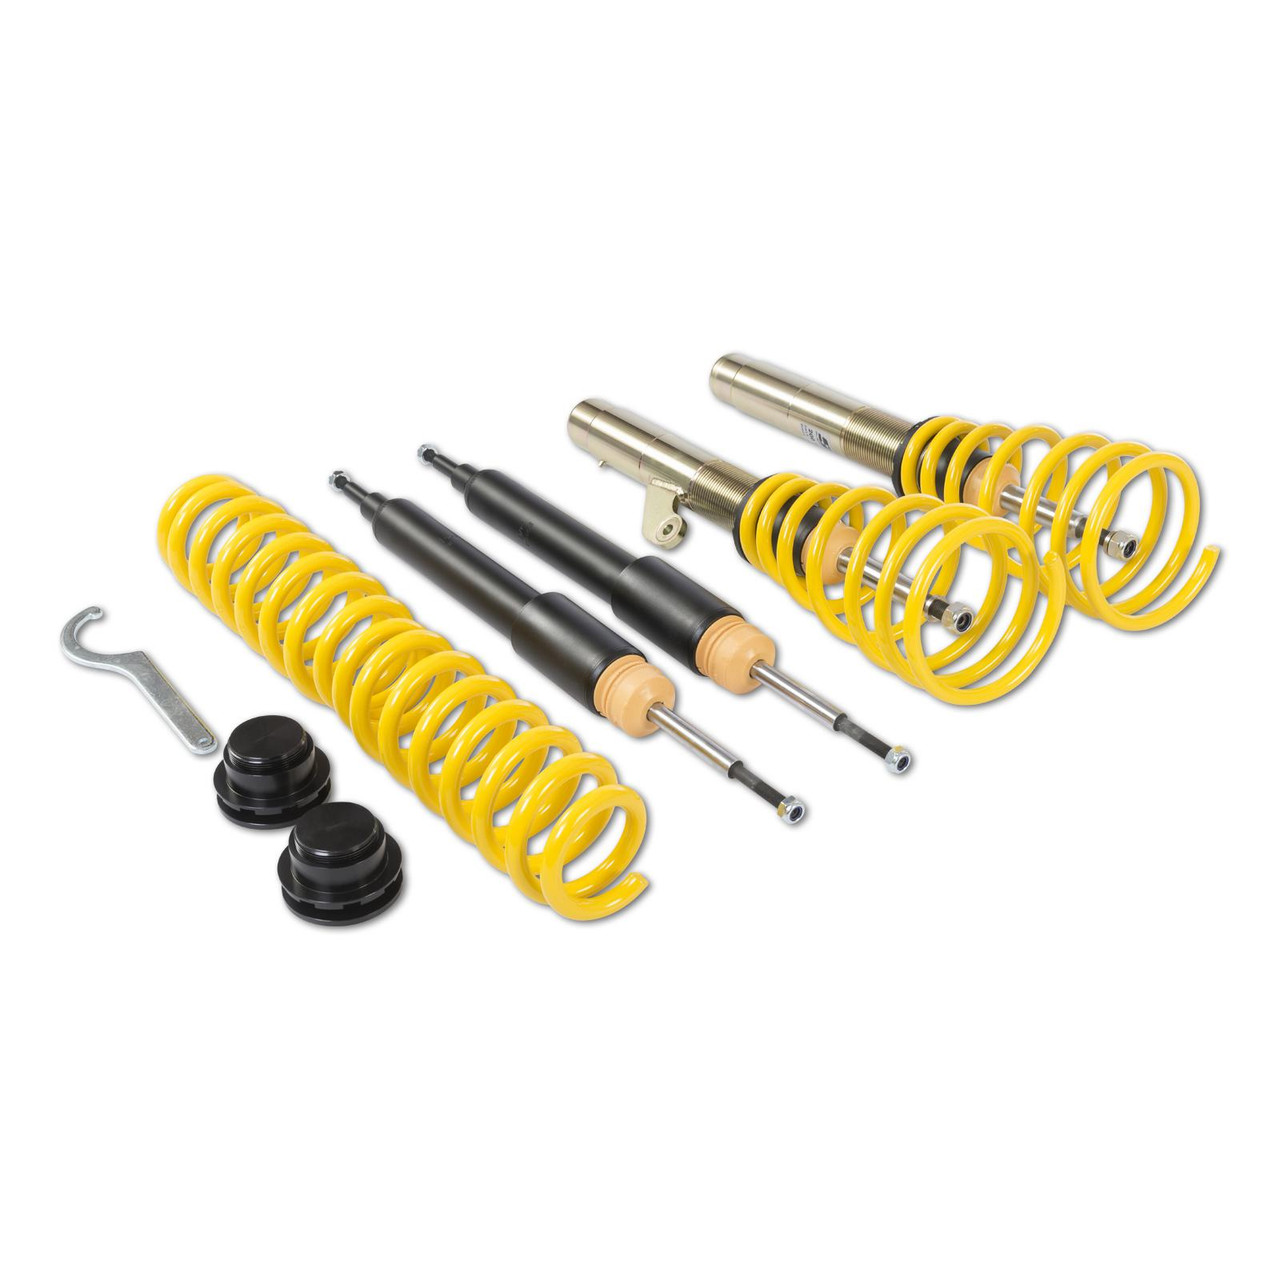 BMW ST X Coilover Kit - ST Suspensions 13220011